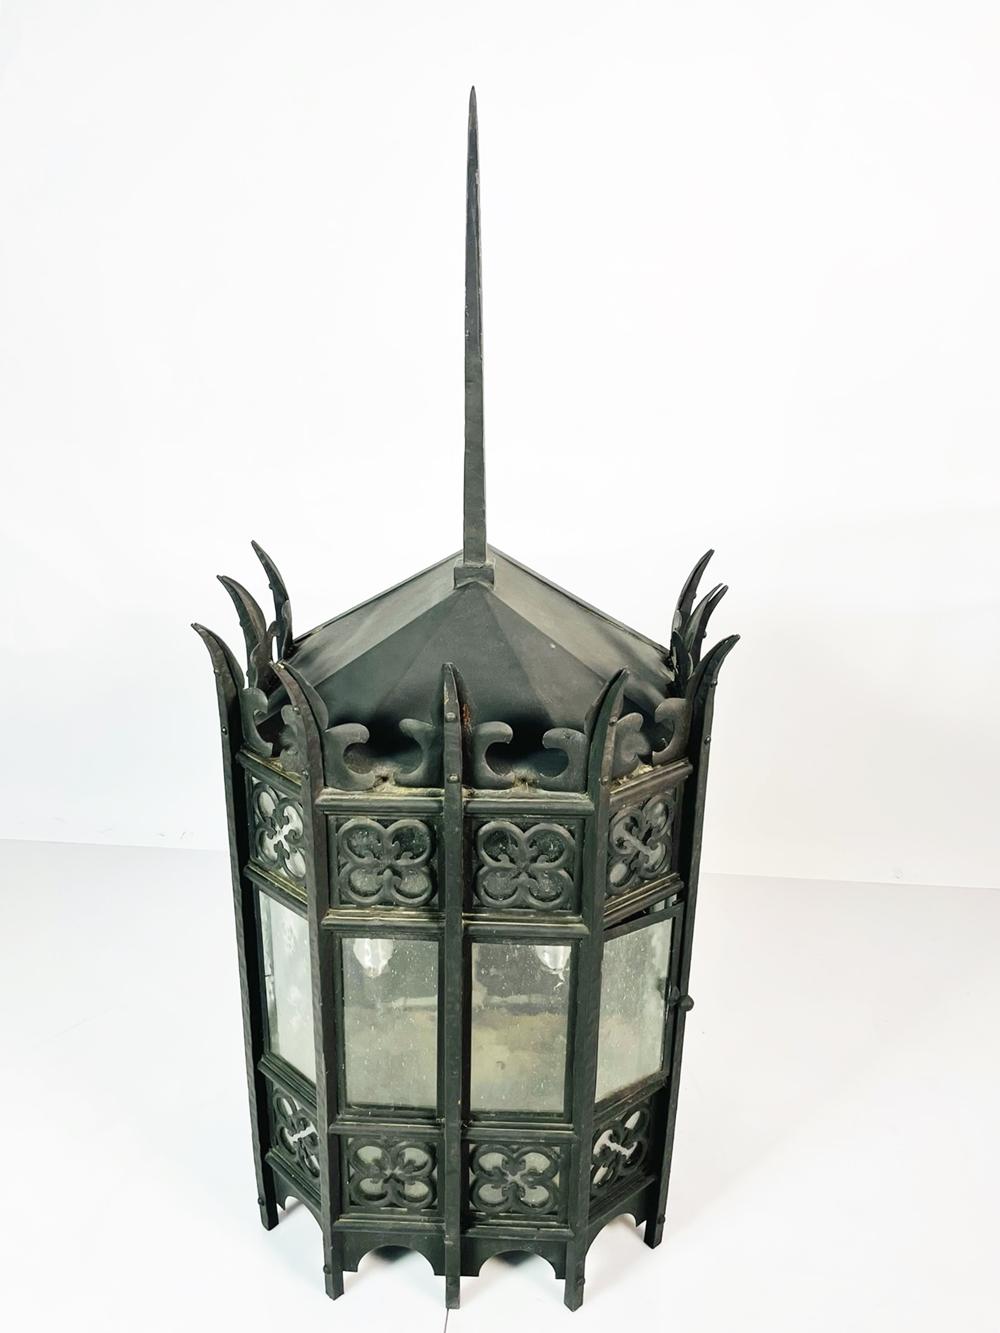 Glass Gothic Revival Wrought Iron Sconce from the Sylvester Stallone Beverly Park Home